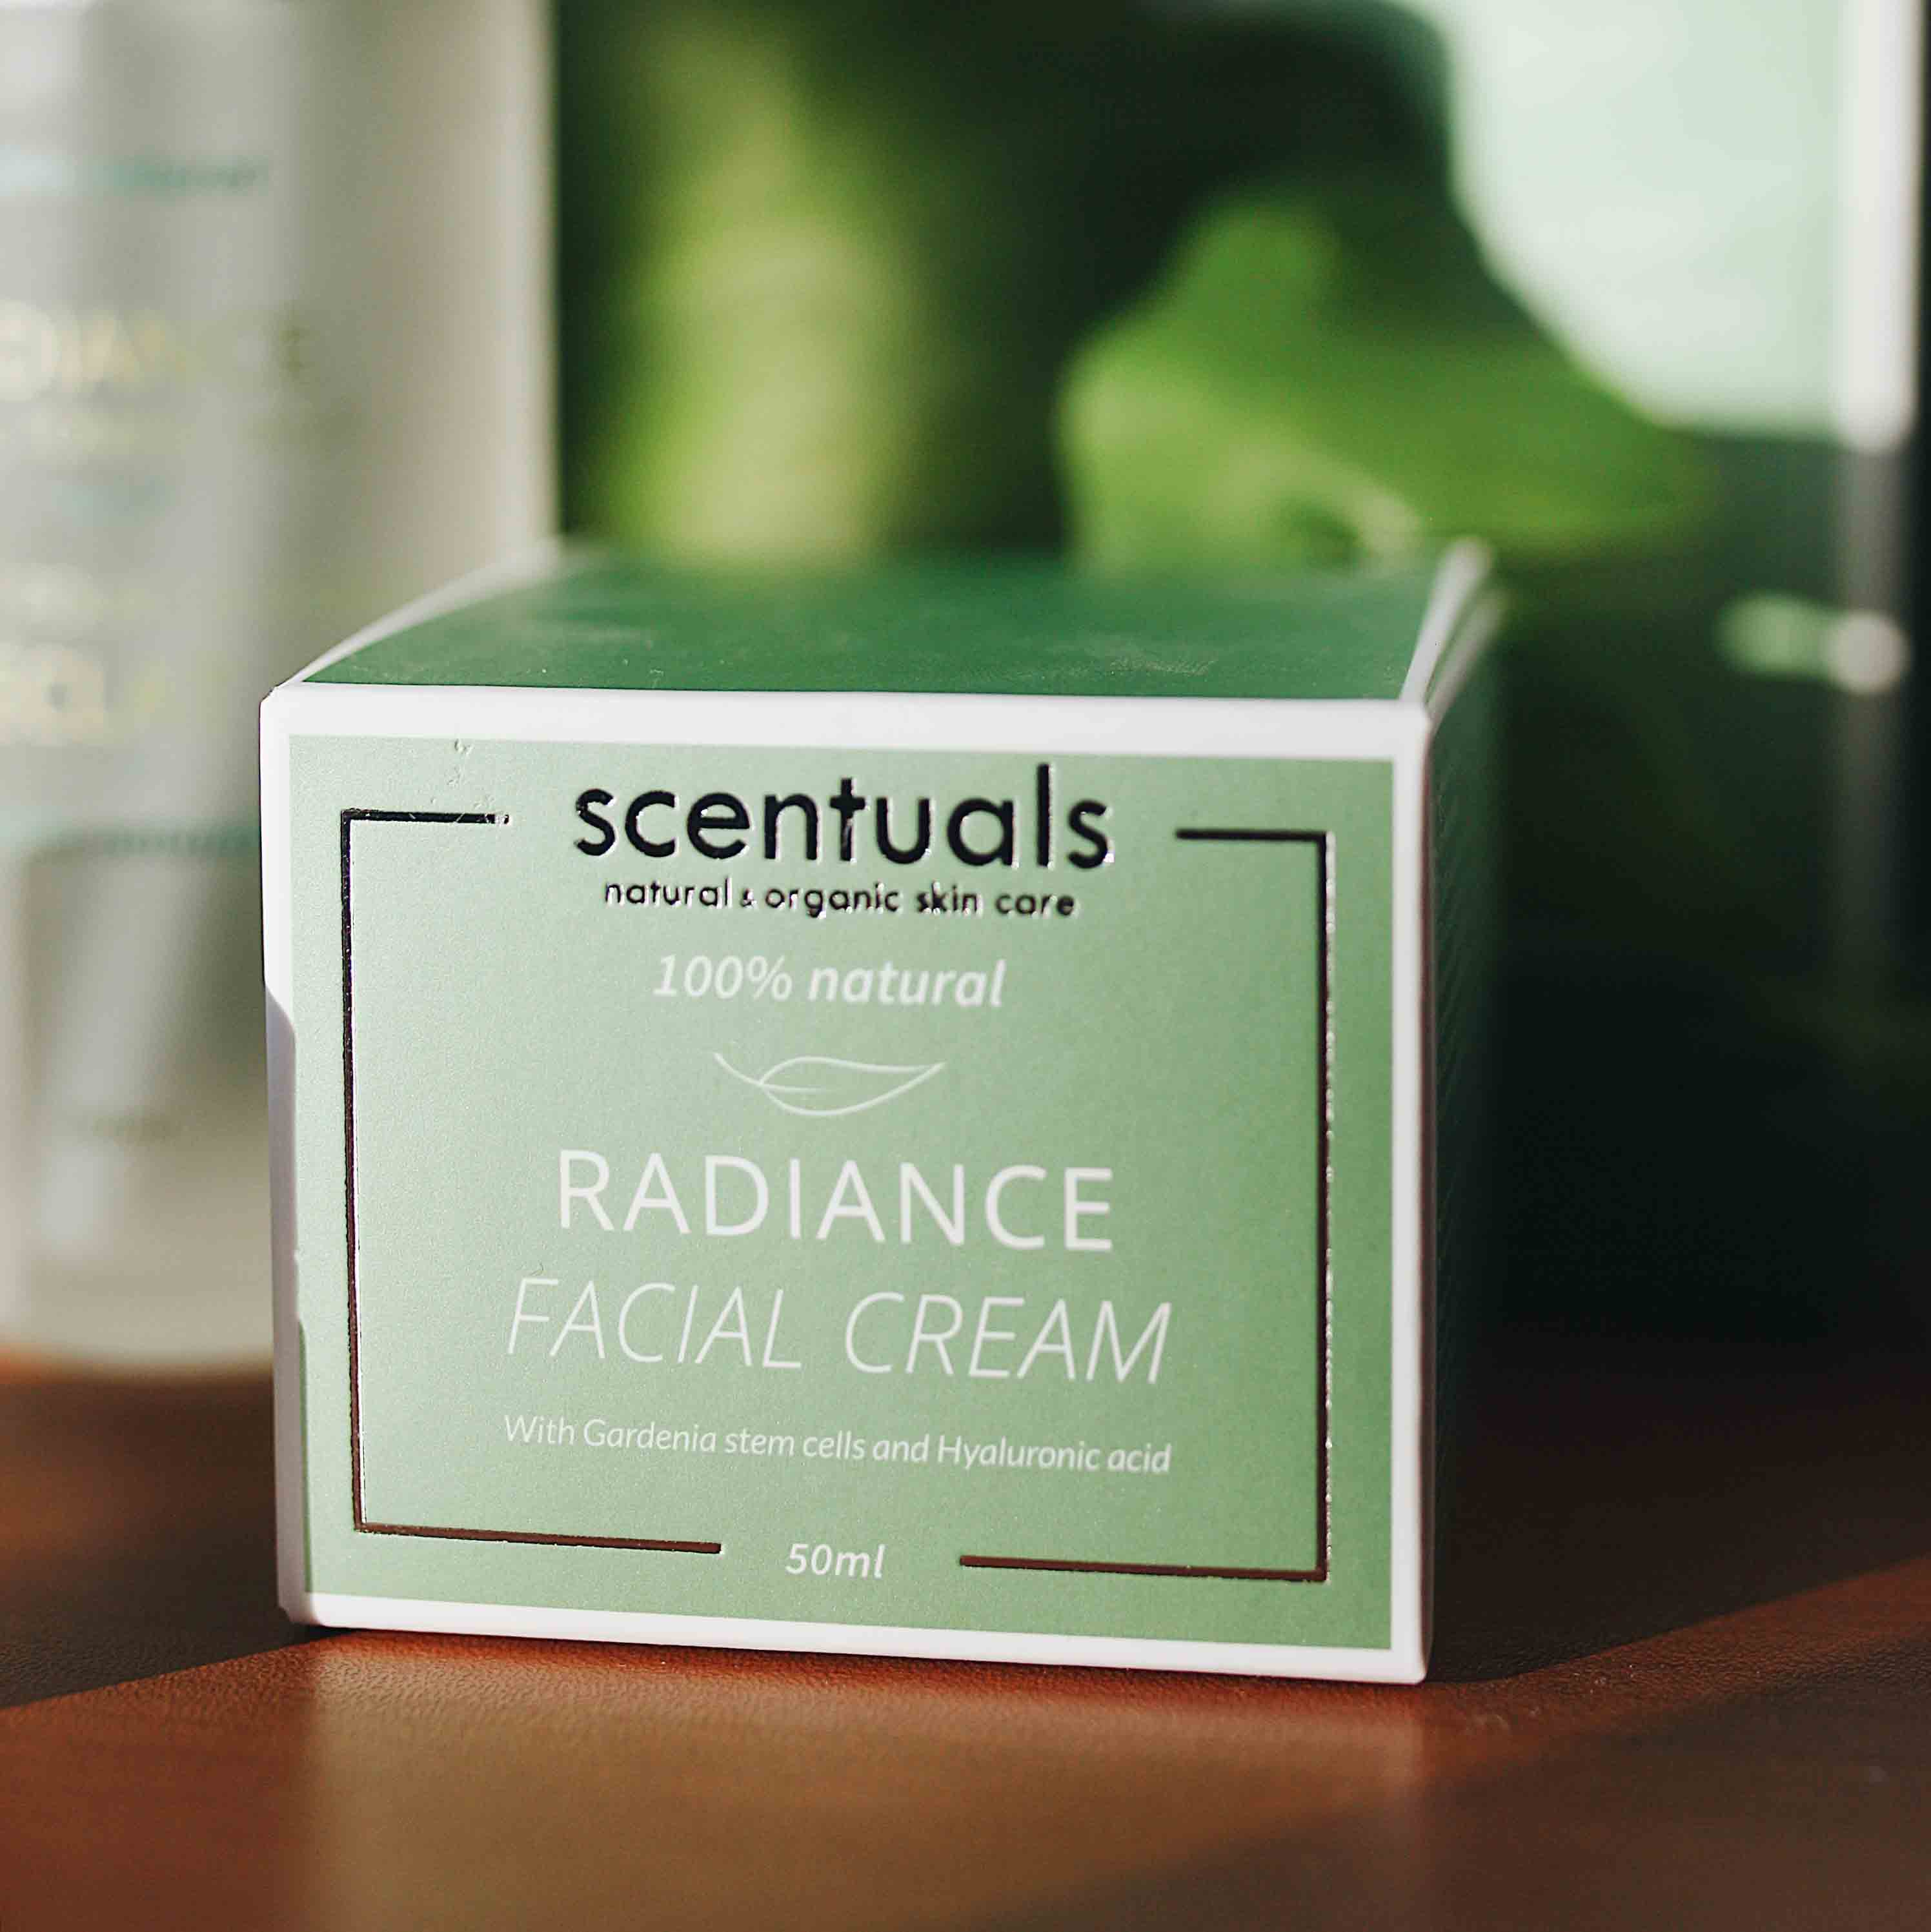 Radiance Facial Cream Scentuals Natural And Organic Skin Care